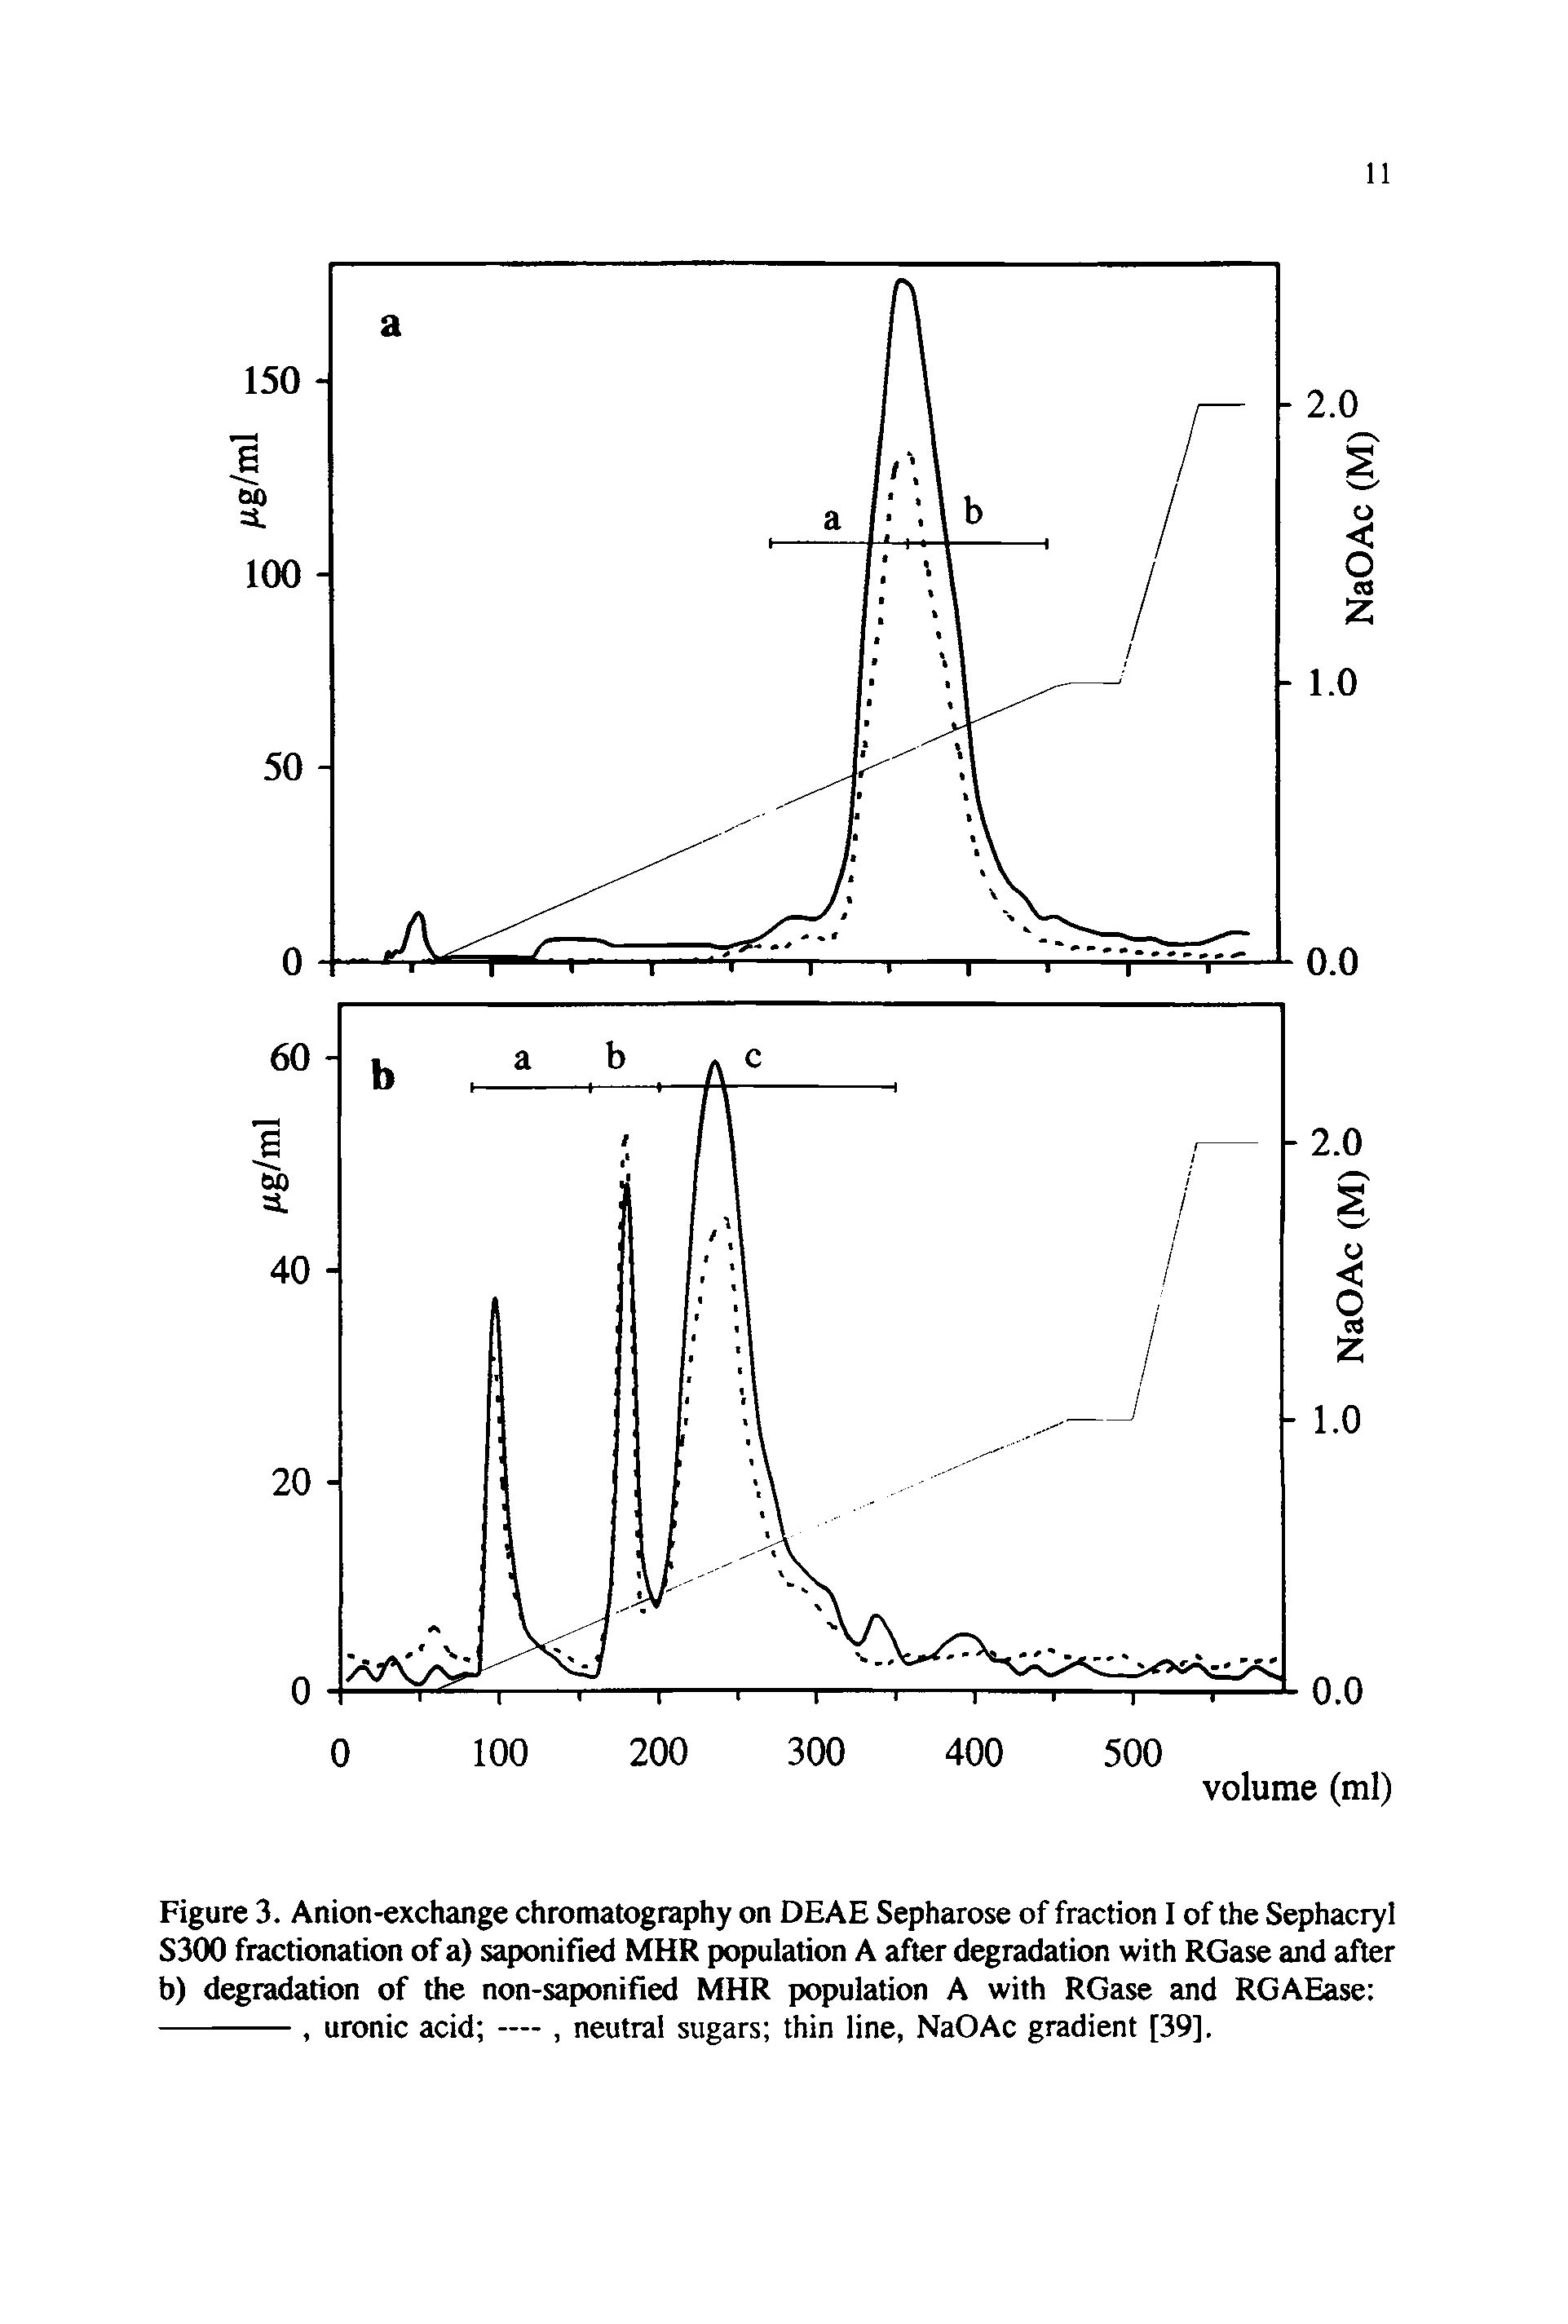 Figure 3. Anion-exchange chromatography on DEAE Sepharose of fraction I of the Sephacryl S300 fractionation of a) saponified MHR population A after degradation with RGase and after b) degradation of the non-saponified MHR population A with RGase and RGAEase ---------, uronic acid —, neutral sugars thin line, NaOAc gradient [39],...